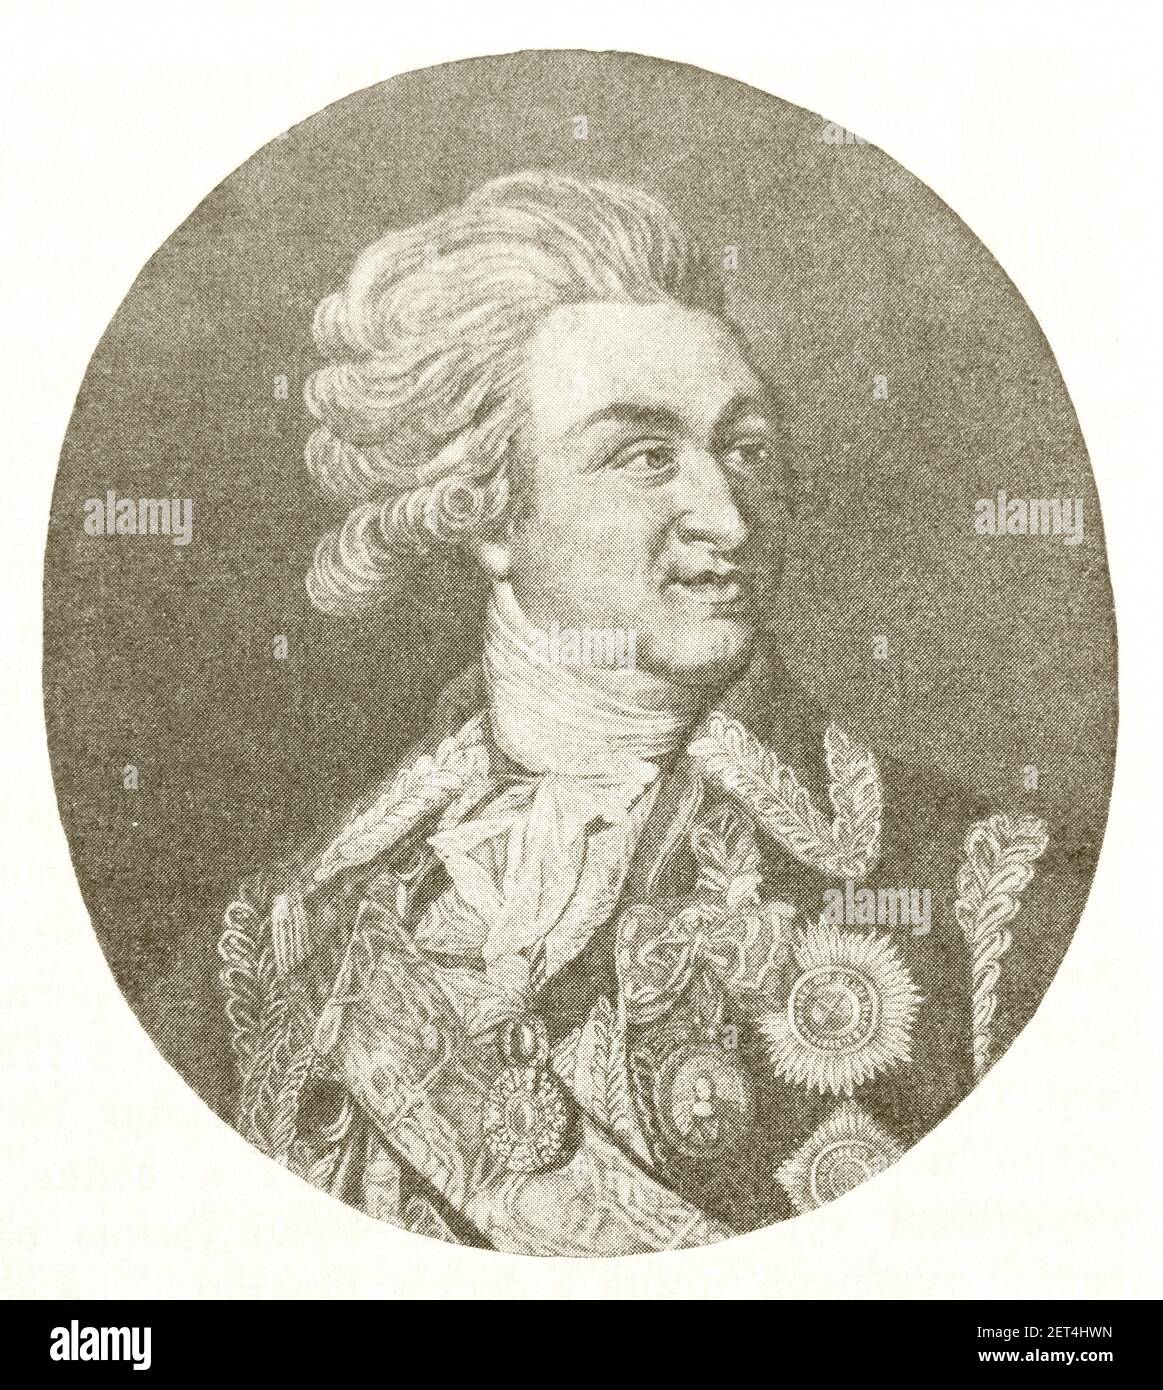 Portrait of Grigory Potemkin. The engraving of the 18th century. Prince Grigory Aleksandrovich Potemkin-Tauricheski (1739 – 1791) was a Russian military leader, statesman, nobleman and favourite of Catherine the Great. He died during negotiations over the Treaty of Jassy, which ended a war with the Ottoman Empire that he had overseen. Stock Photo